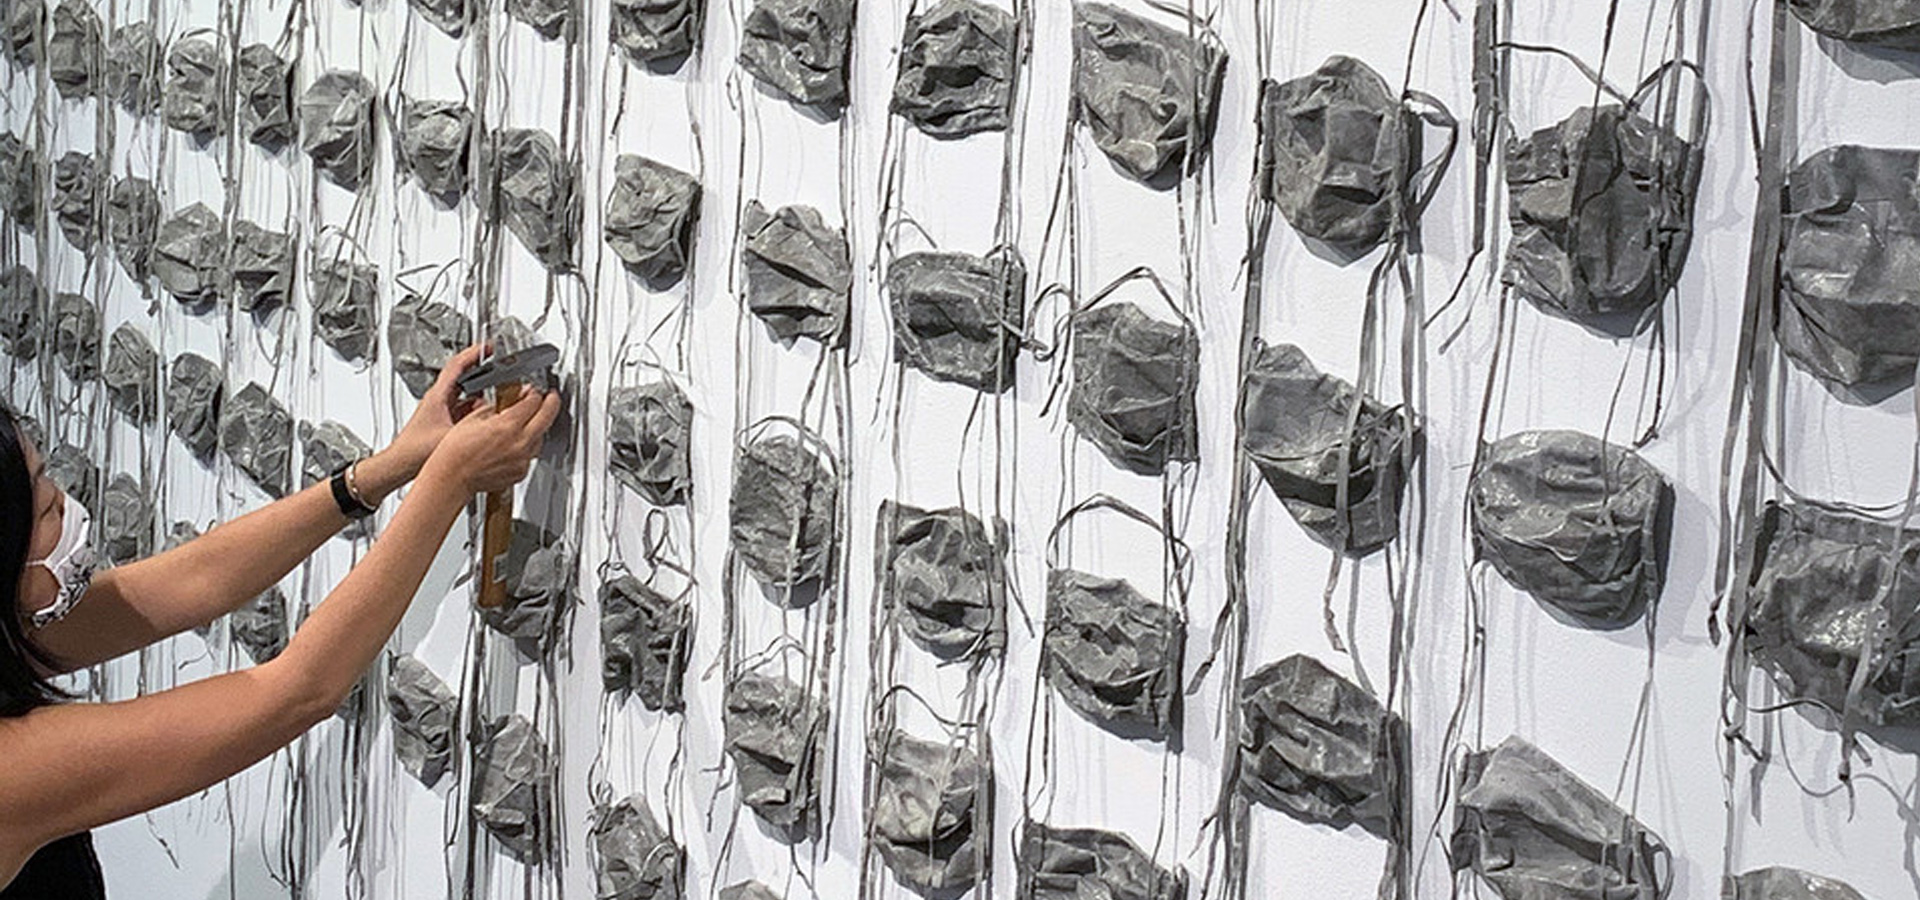 Rows of concrete surgical face masks mounted on a wall.